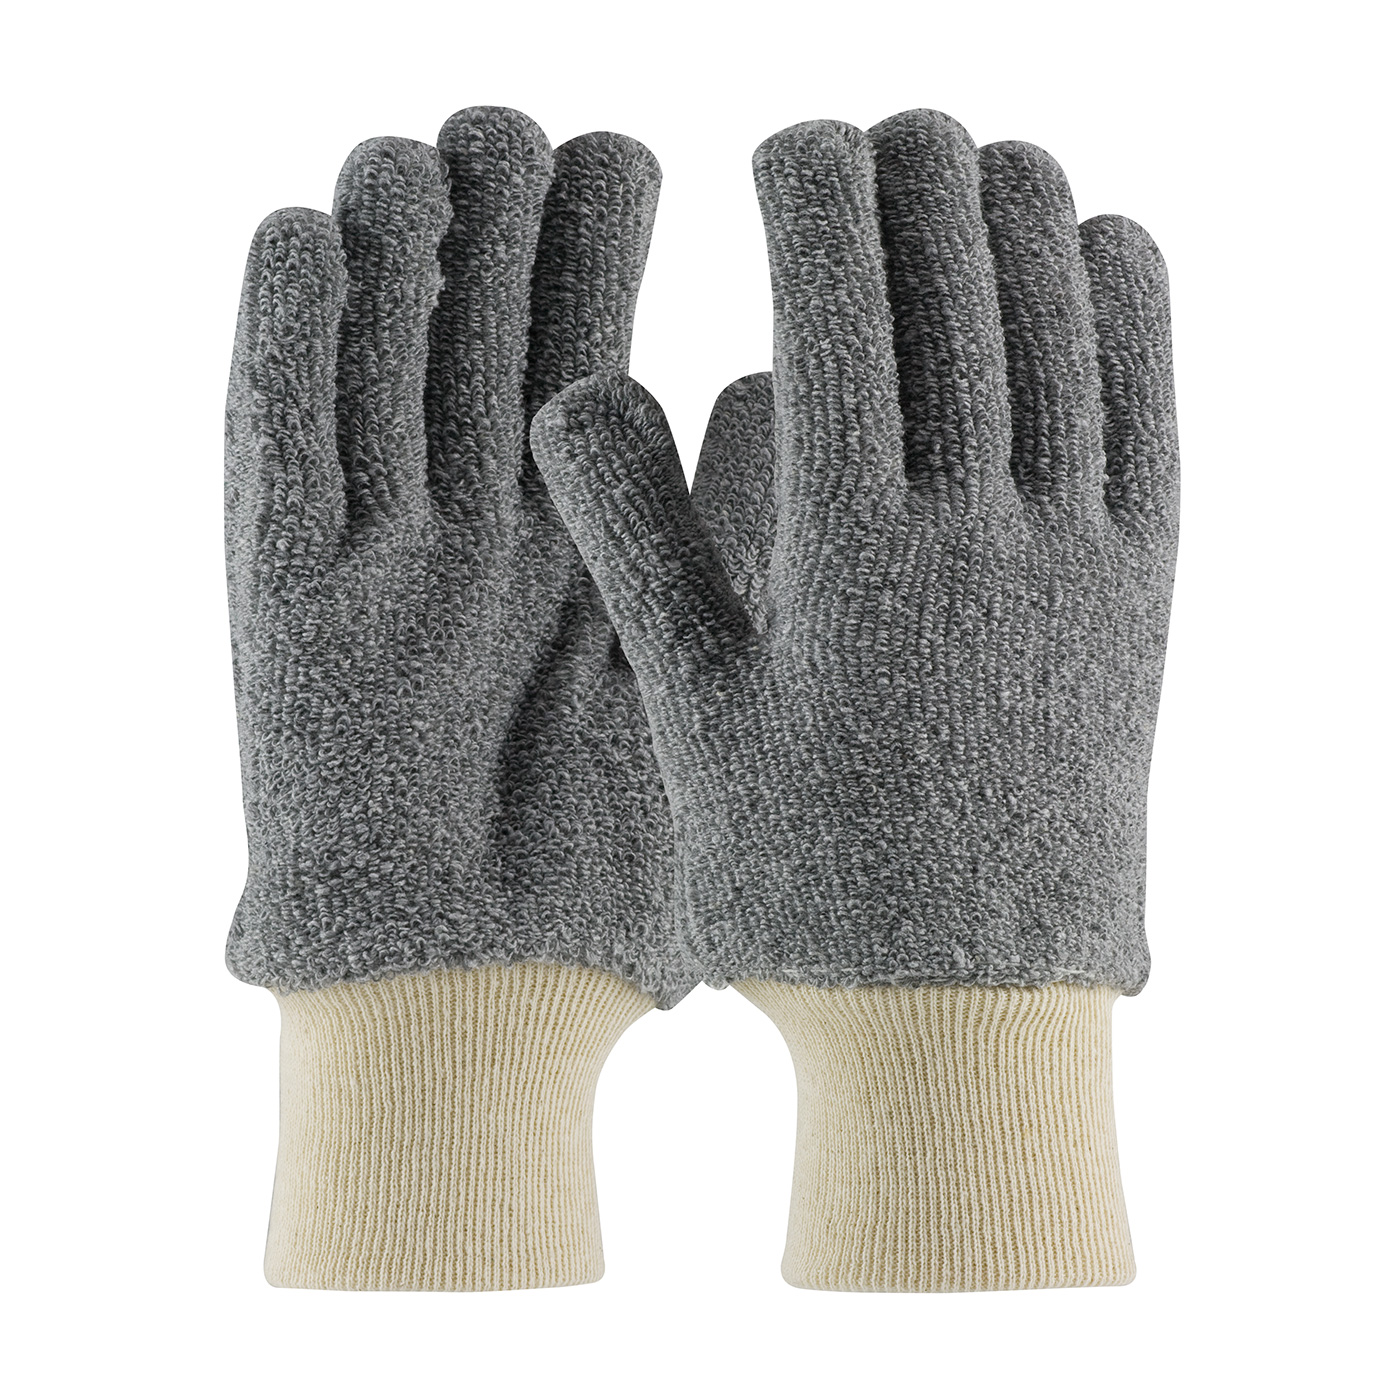 Terry Cloth Knit Gloves & Sleeves